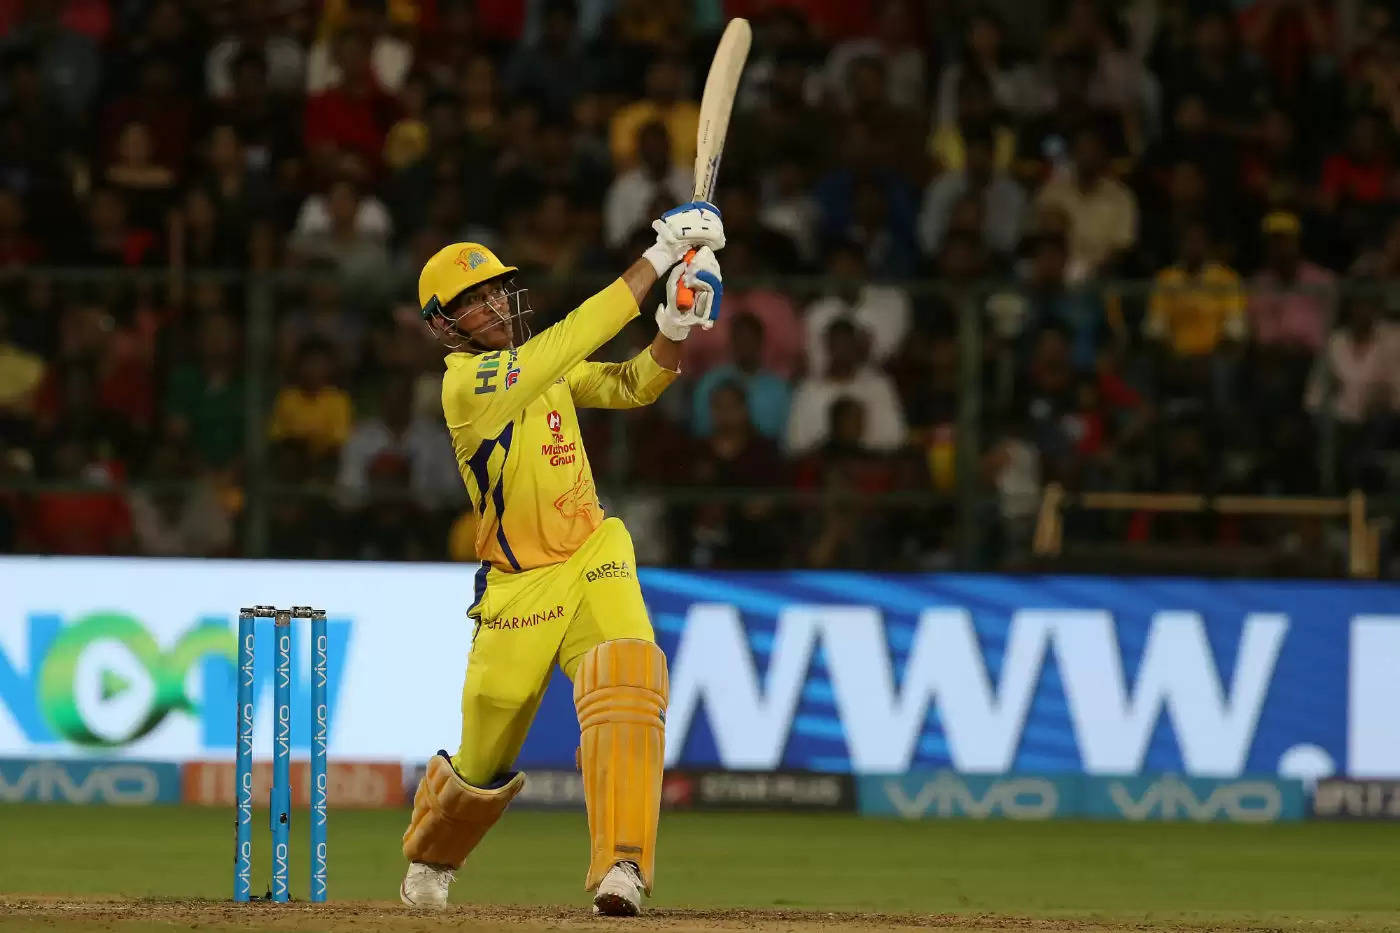 Will Dhoni get a last chance even if IPL 2020 is canceled? His childhood coach remains hopeful